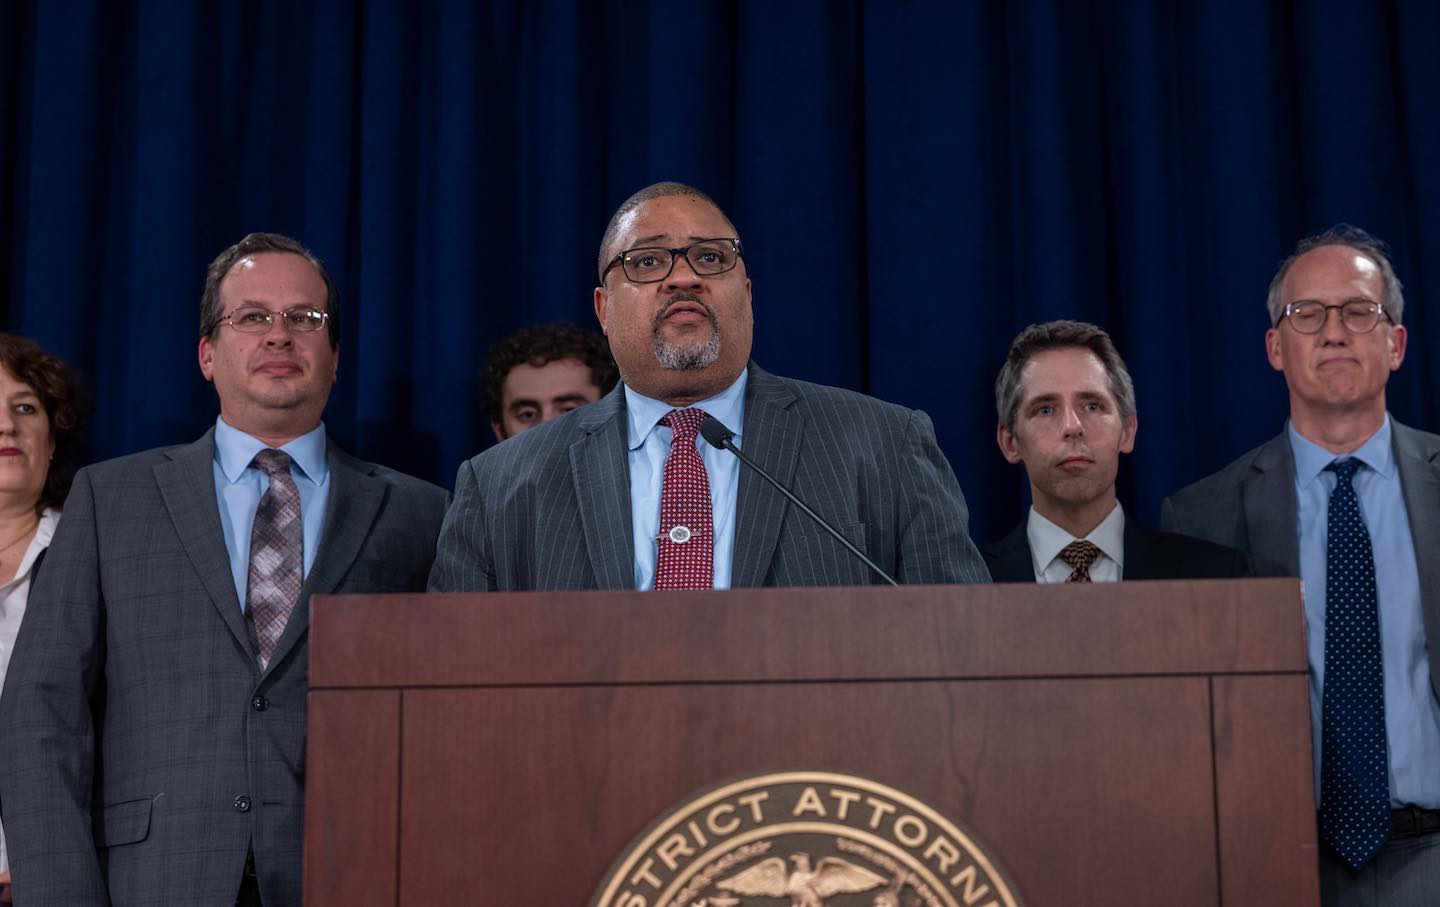 Manhattan District Attorney Alvin Bragg stands with members of his staff at a news conference following the conviction of former president Donald Trump in his hush-money trial on May 30 in New York City.